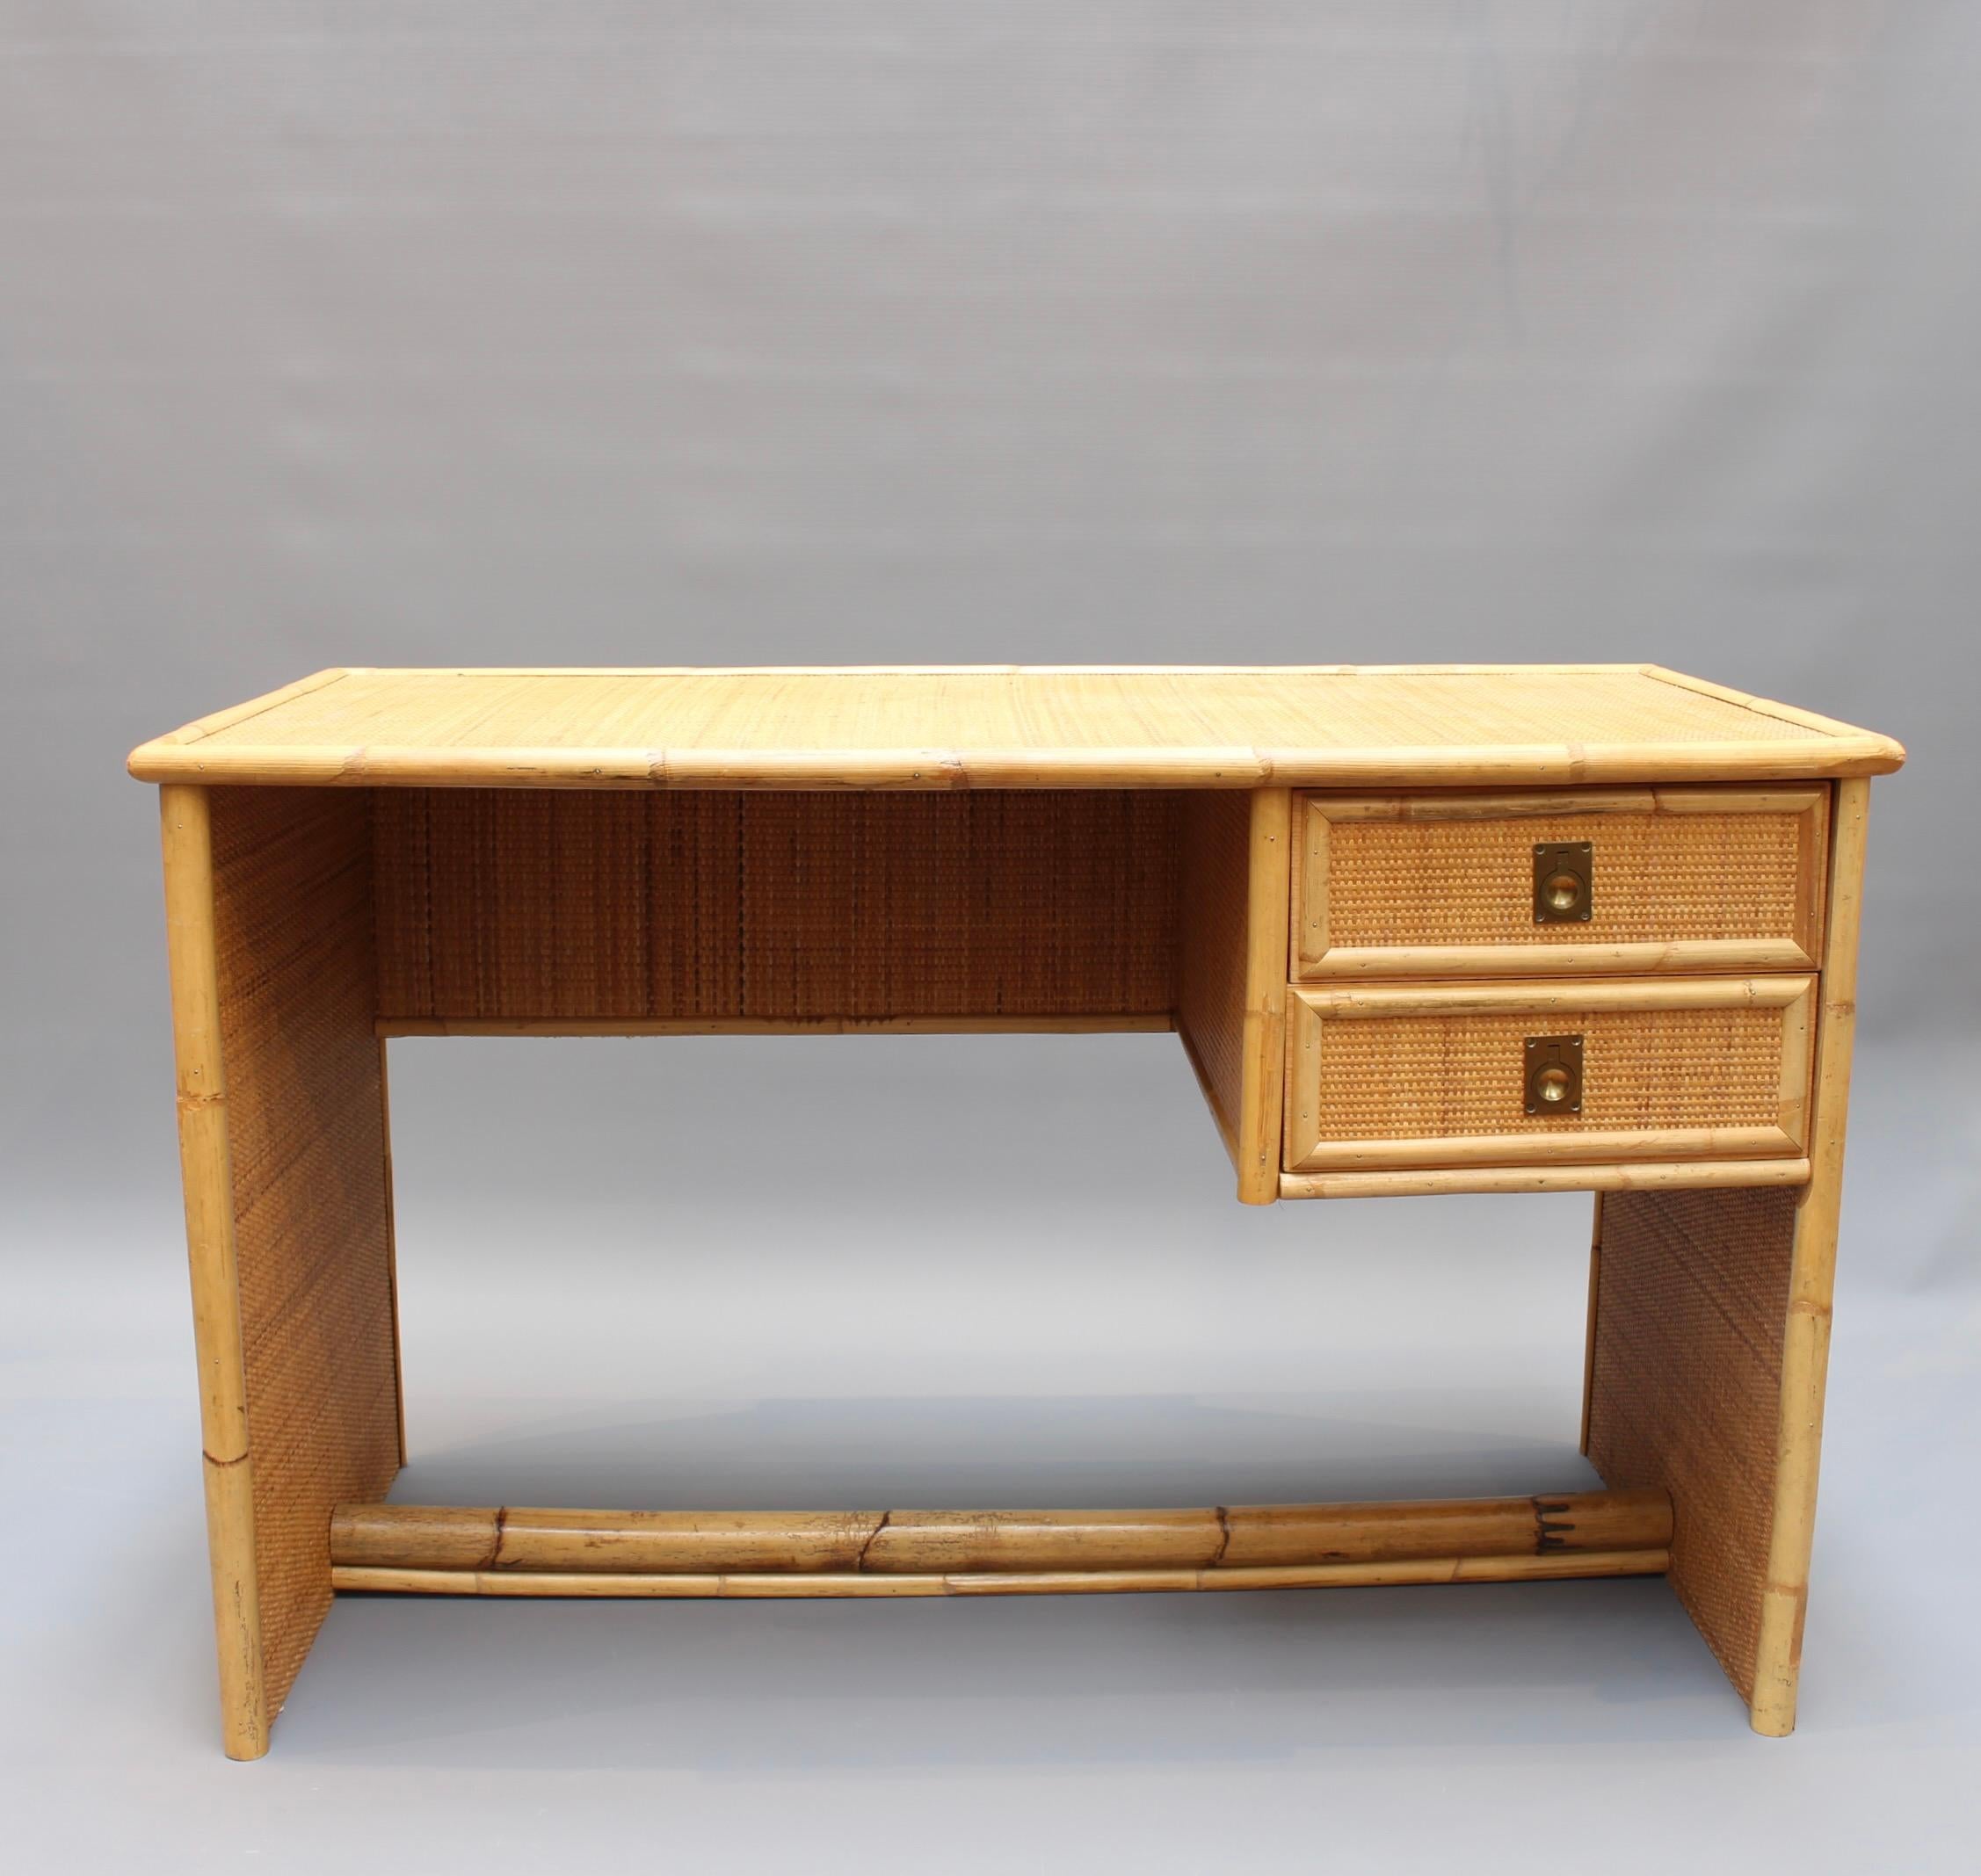 Vintage Italian Rattan desk by well known producer, Dal Vera (circa 1970s). An absolute charmer and an icon of the era. There are two drawers located under the desk with stylish brass ring handles. The sides beautifully patterned in wicker couple